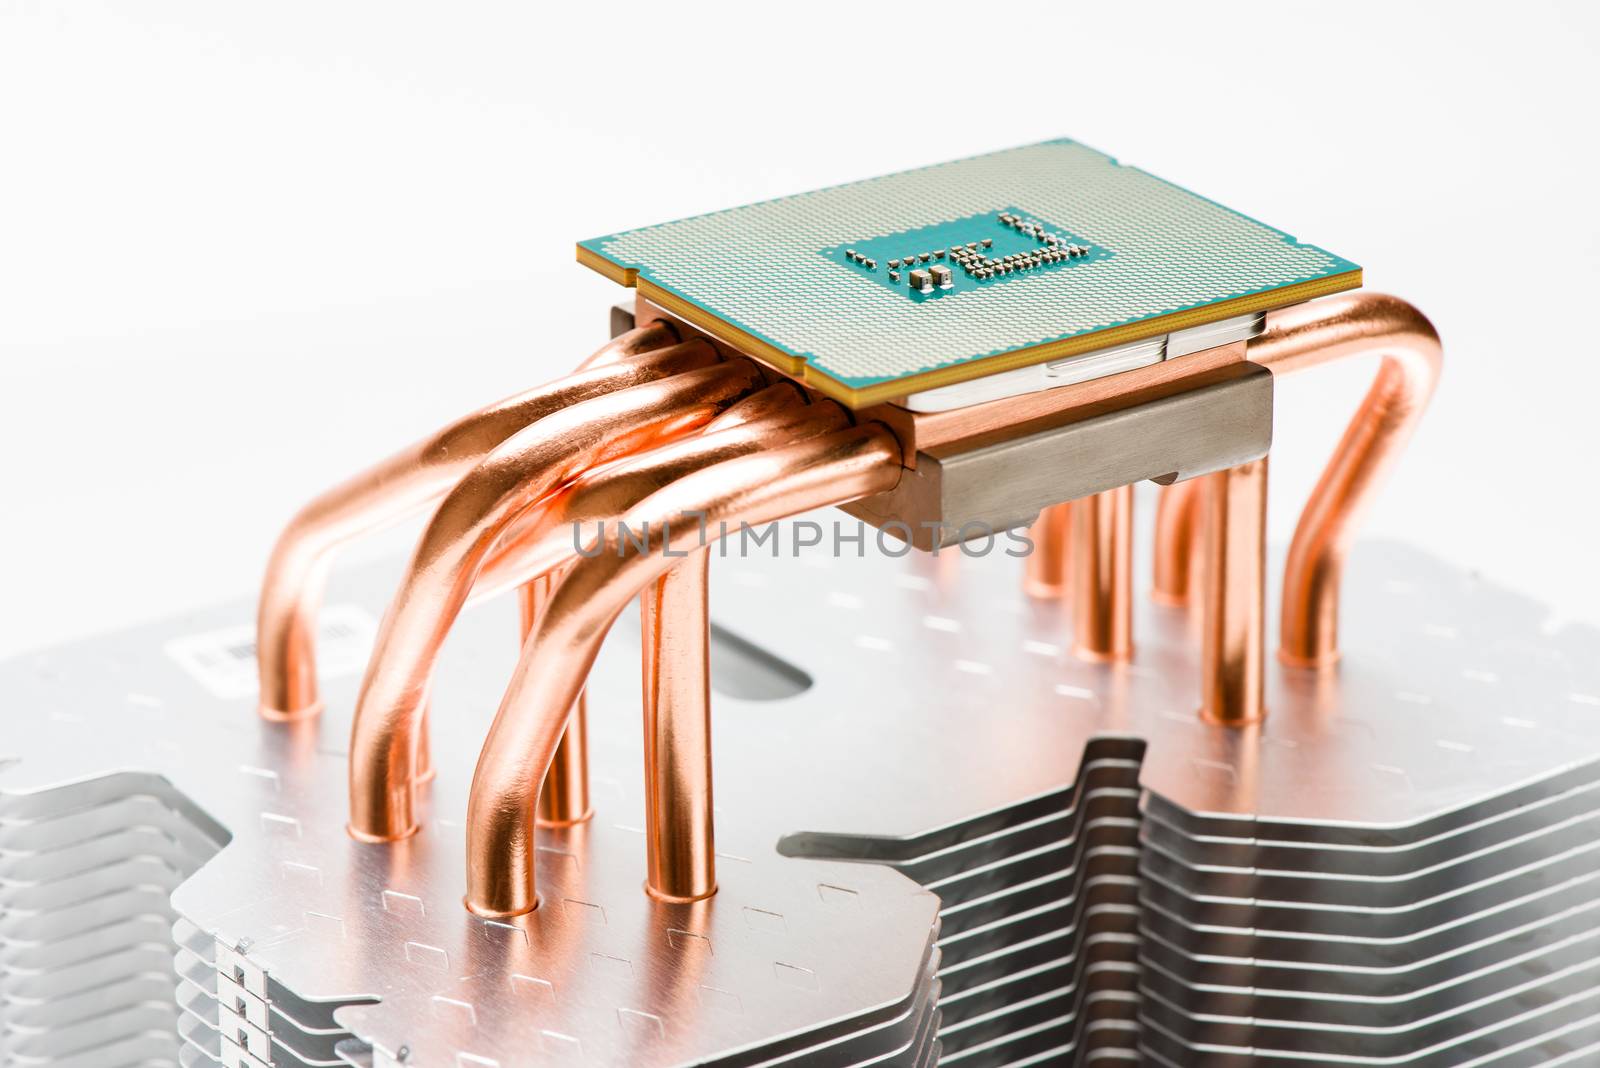 Modern processor on plate the cooler. Cooling concept on white background